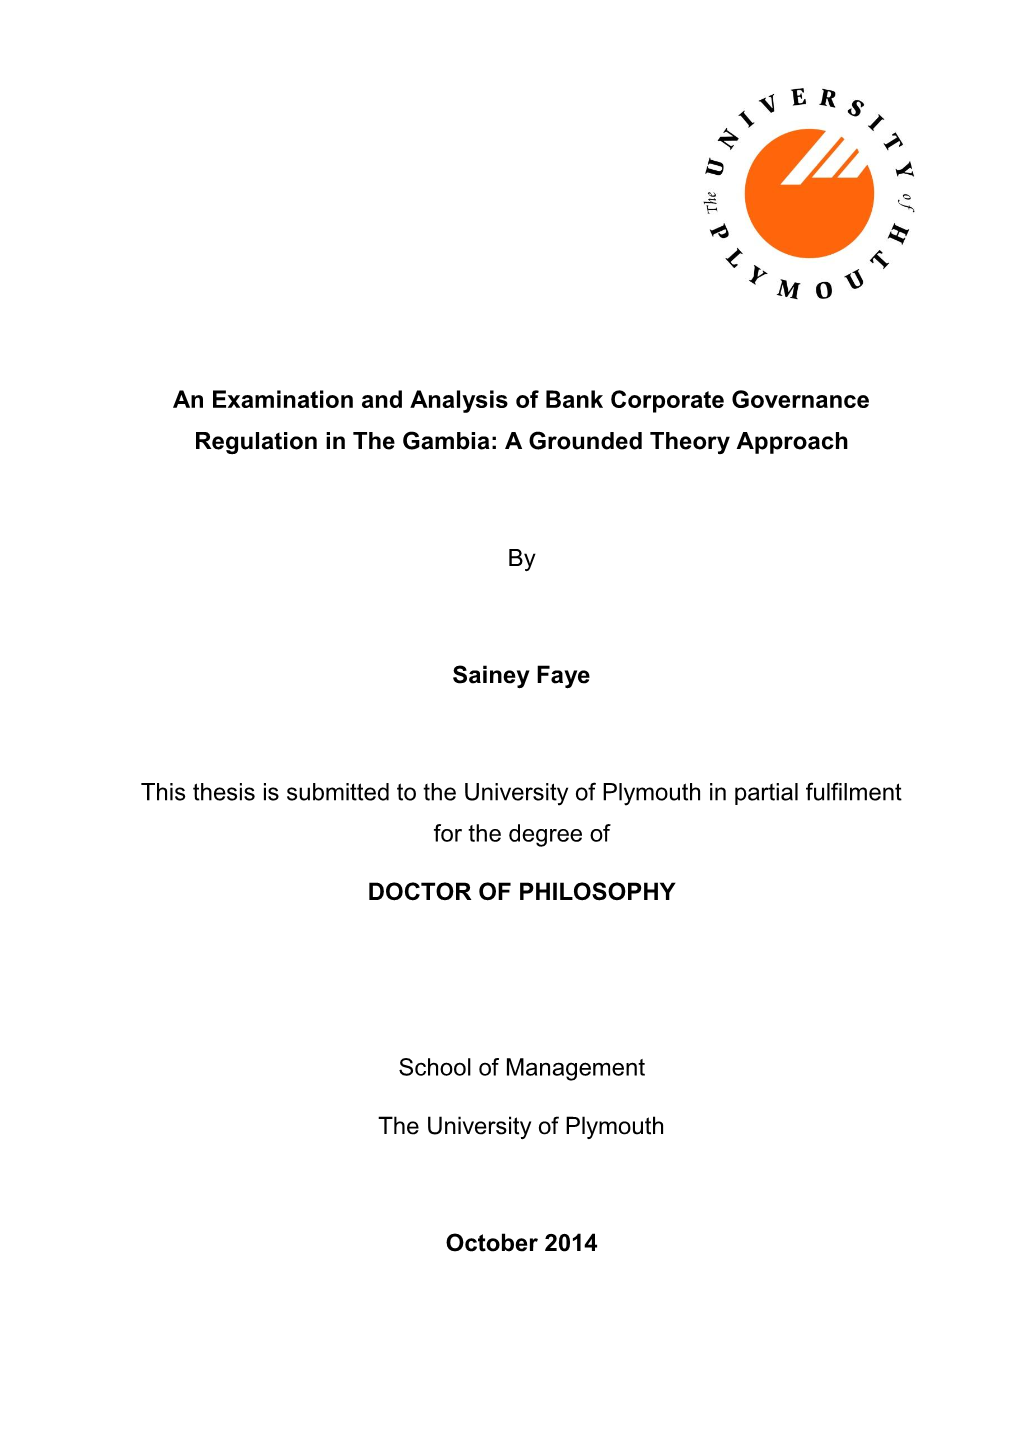 An Examination and Analysis of Bank Corporate Governance Regulation in the Gambia: a Grounded Theory Approach